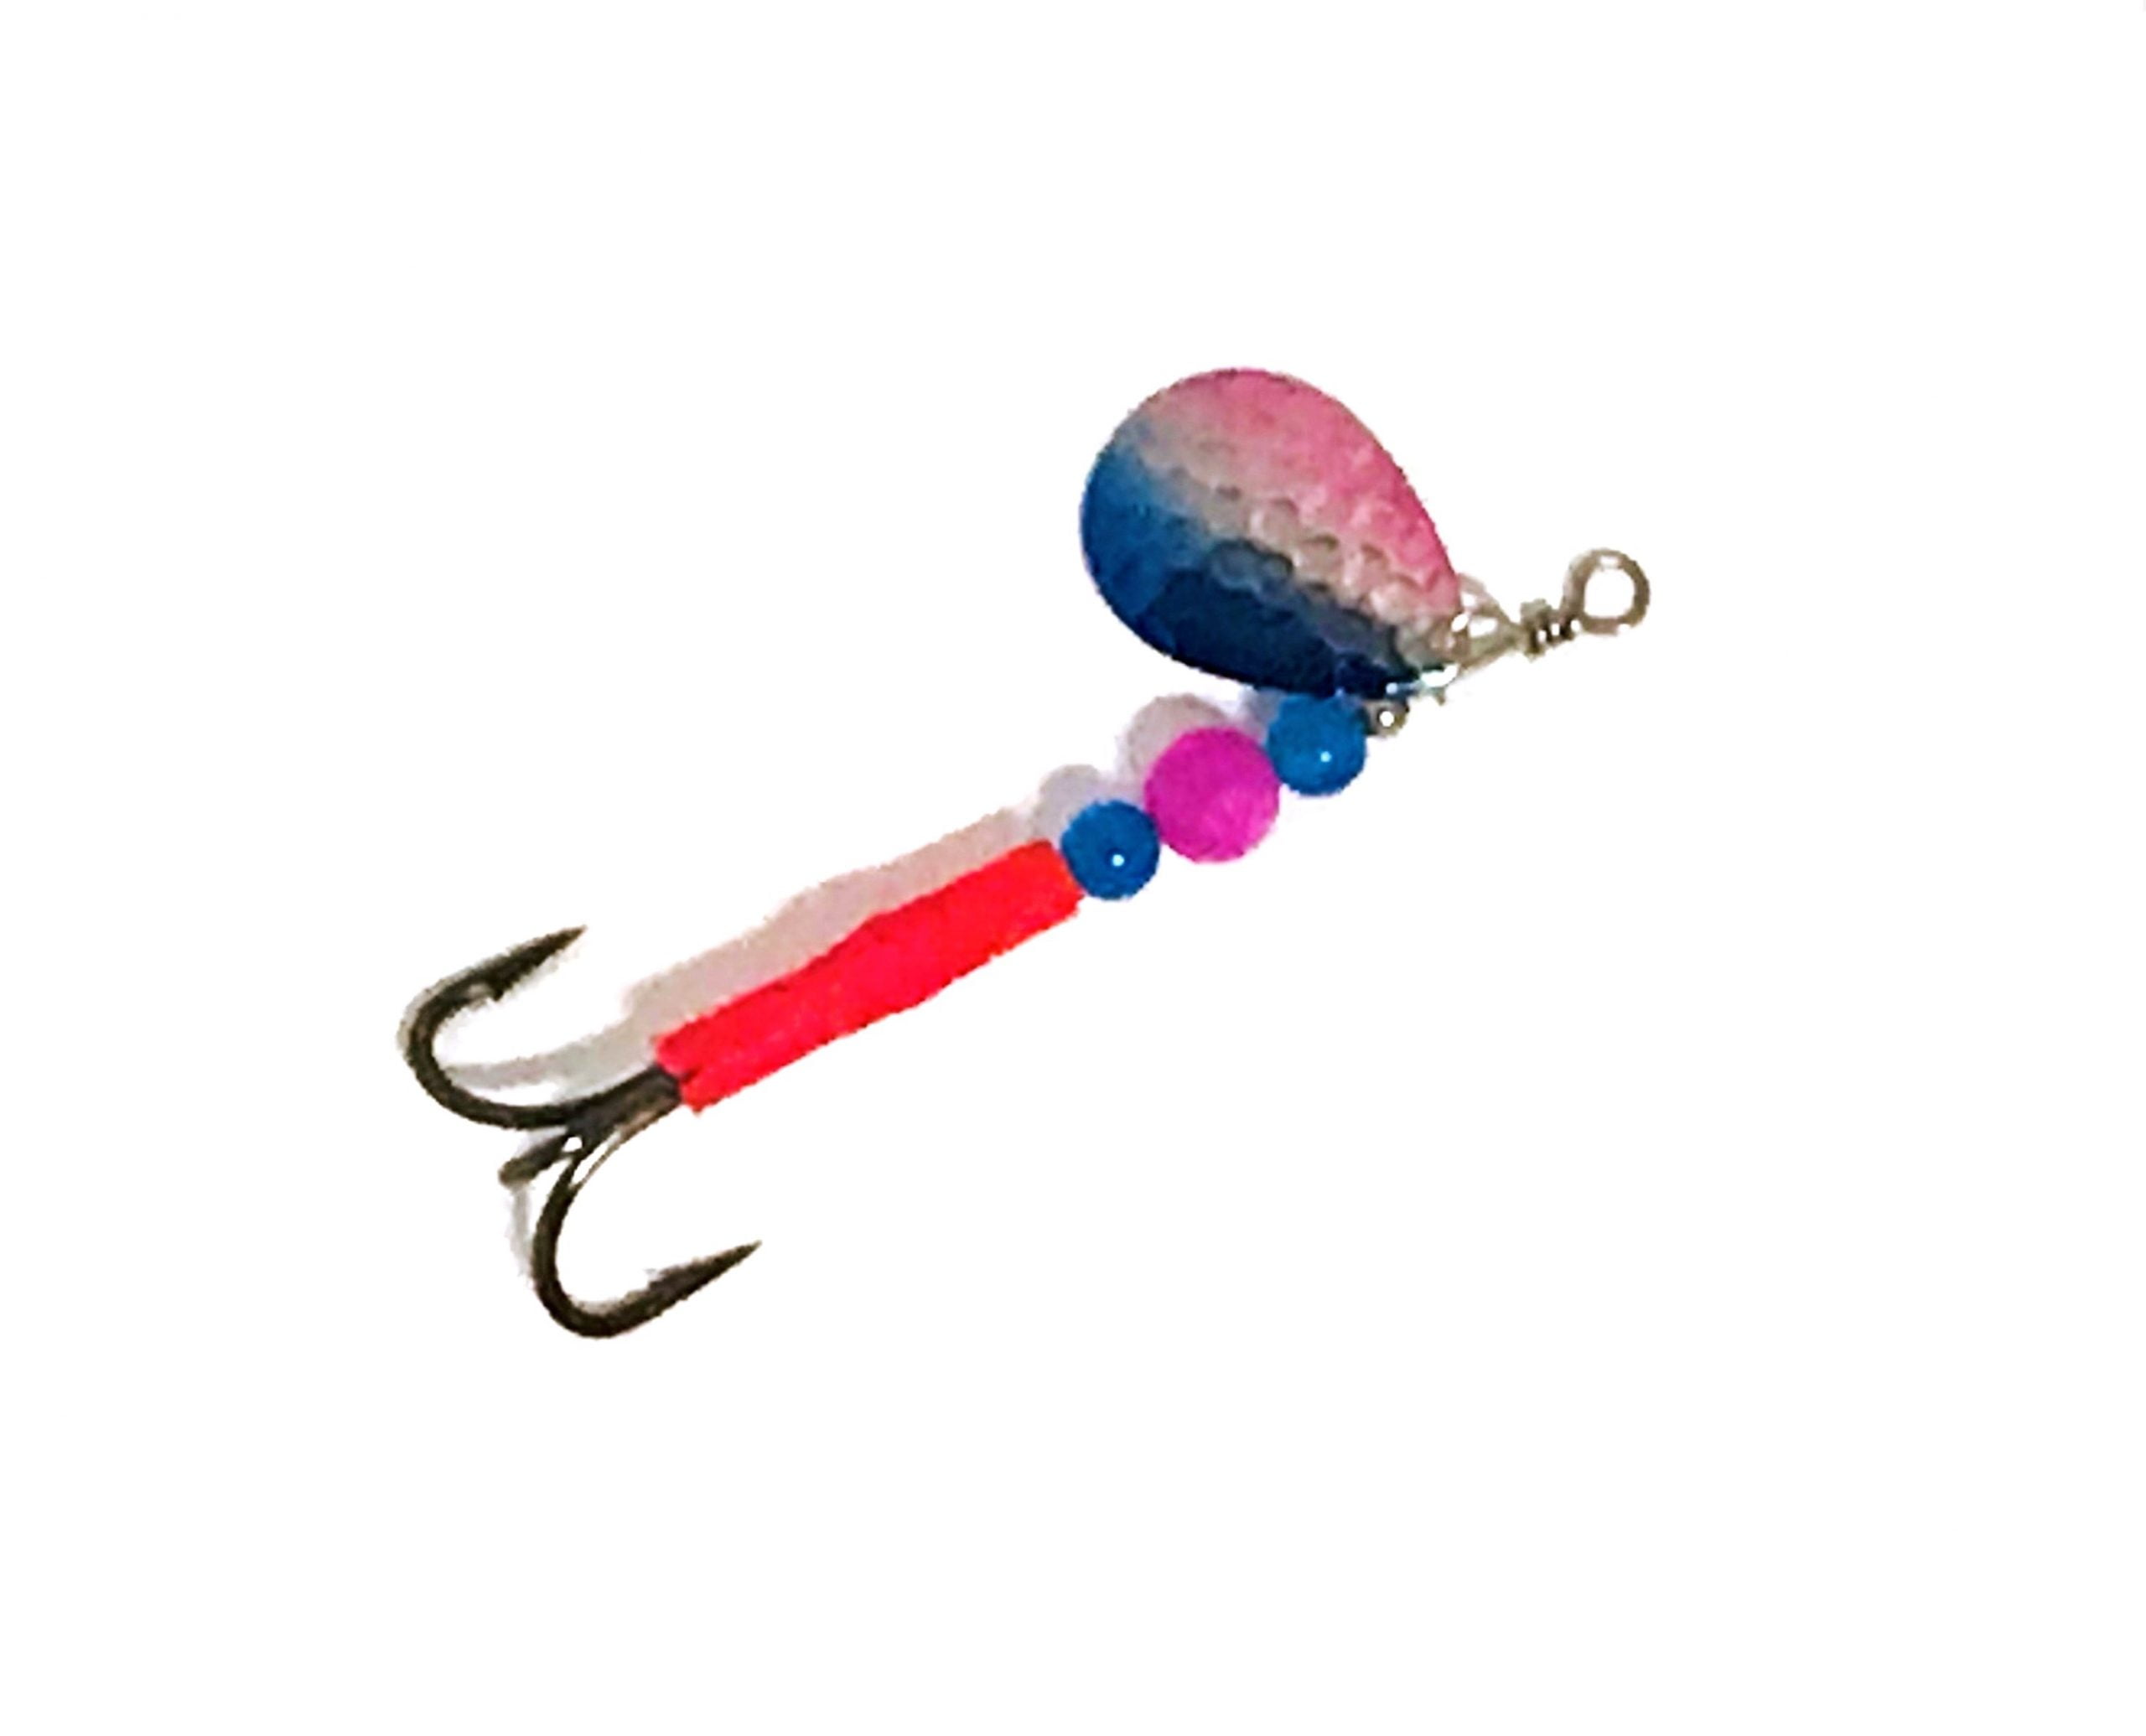 3.5 Hammered Colorado Cotton Candy” Dirty Troll Trolling Spinners - Dirty  Troll Salmon Trolling Spinners